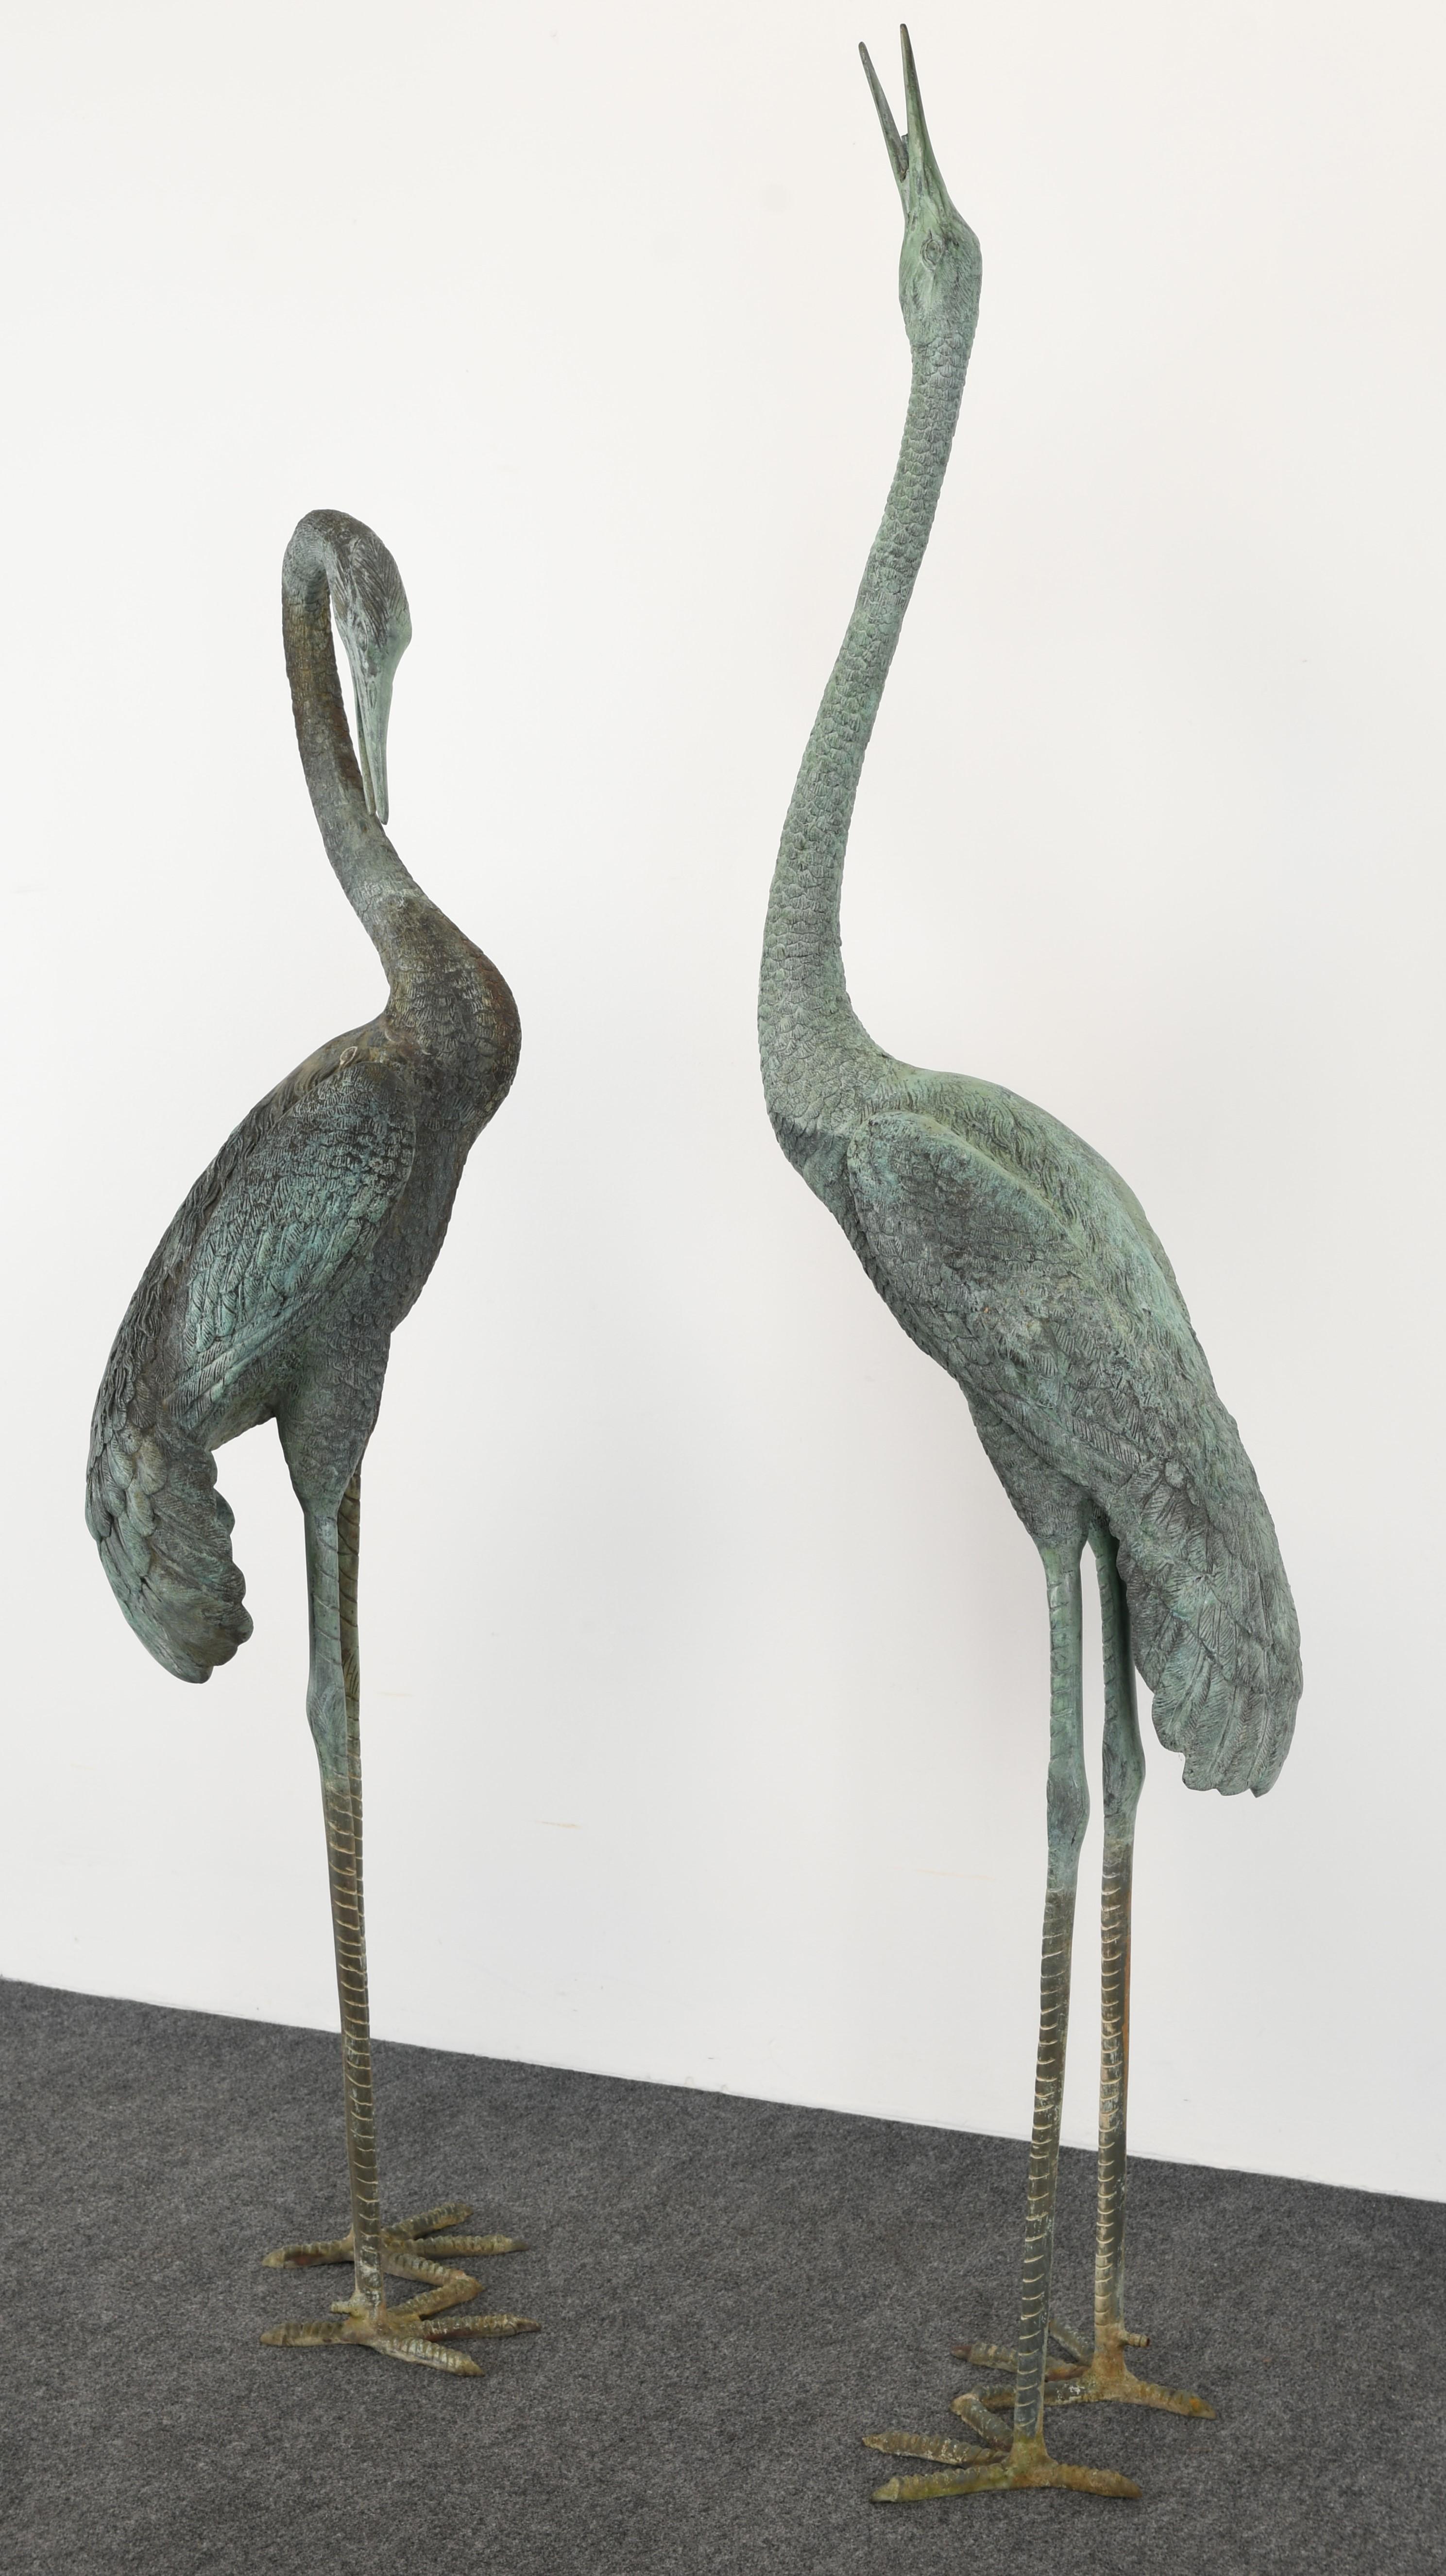 A monumental pair of Egret or Crane Fountains. This stylish pair would be stunning in a garden setting. The bronze egrets are highly detailed and each has a fountain spout, as shown in images. They are structurally sound and in good condition with